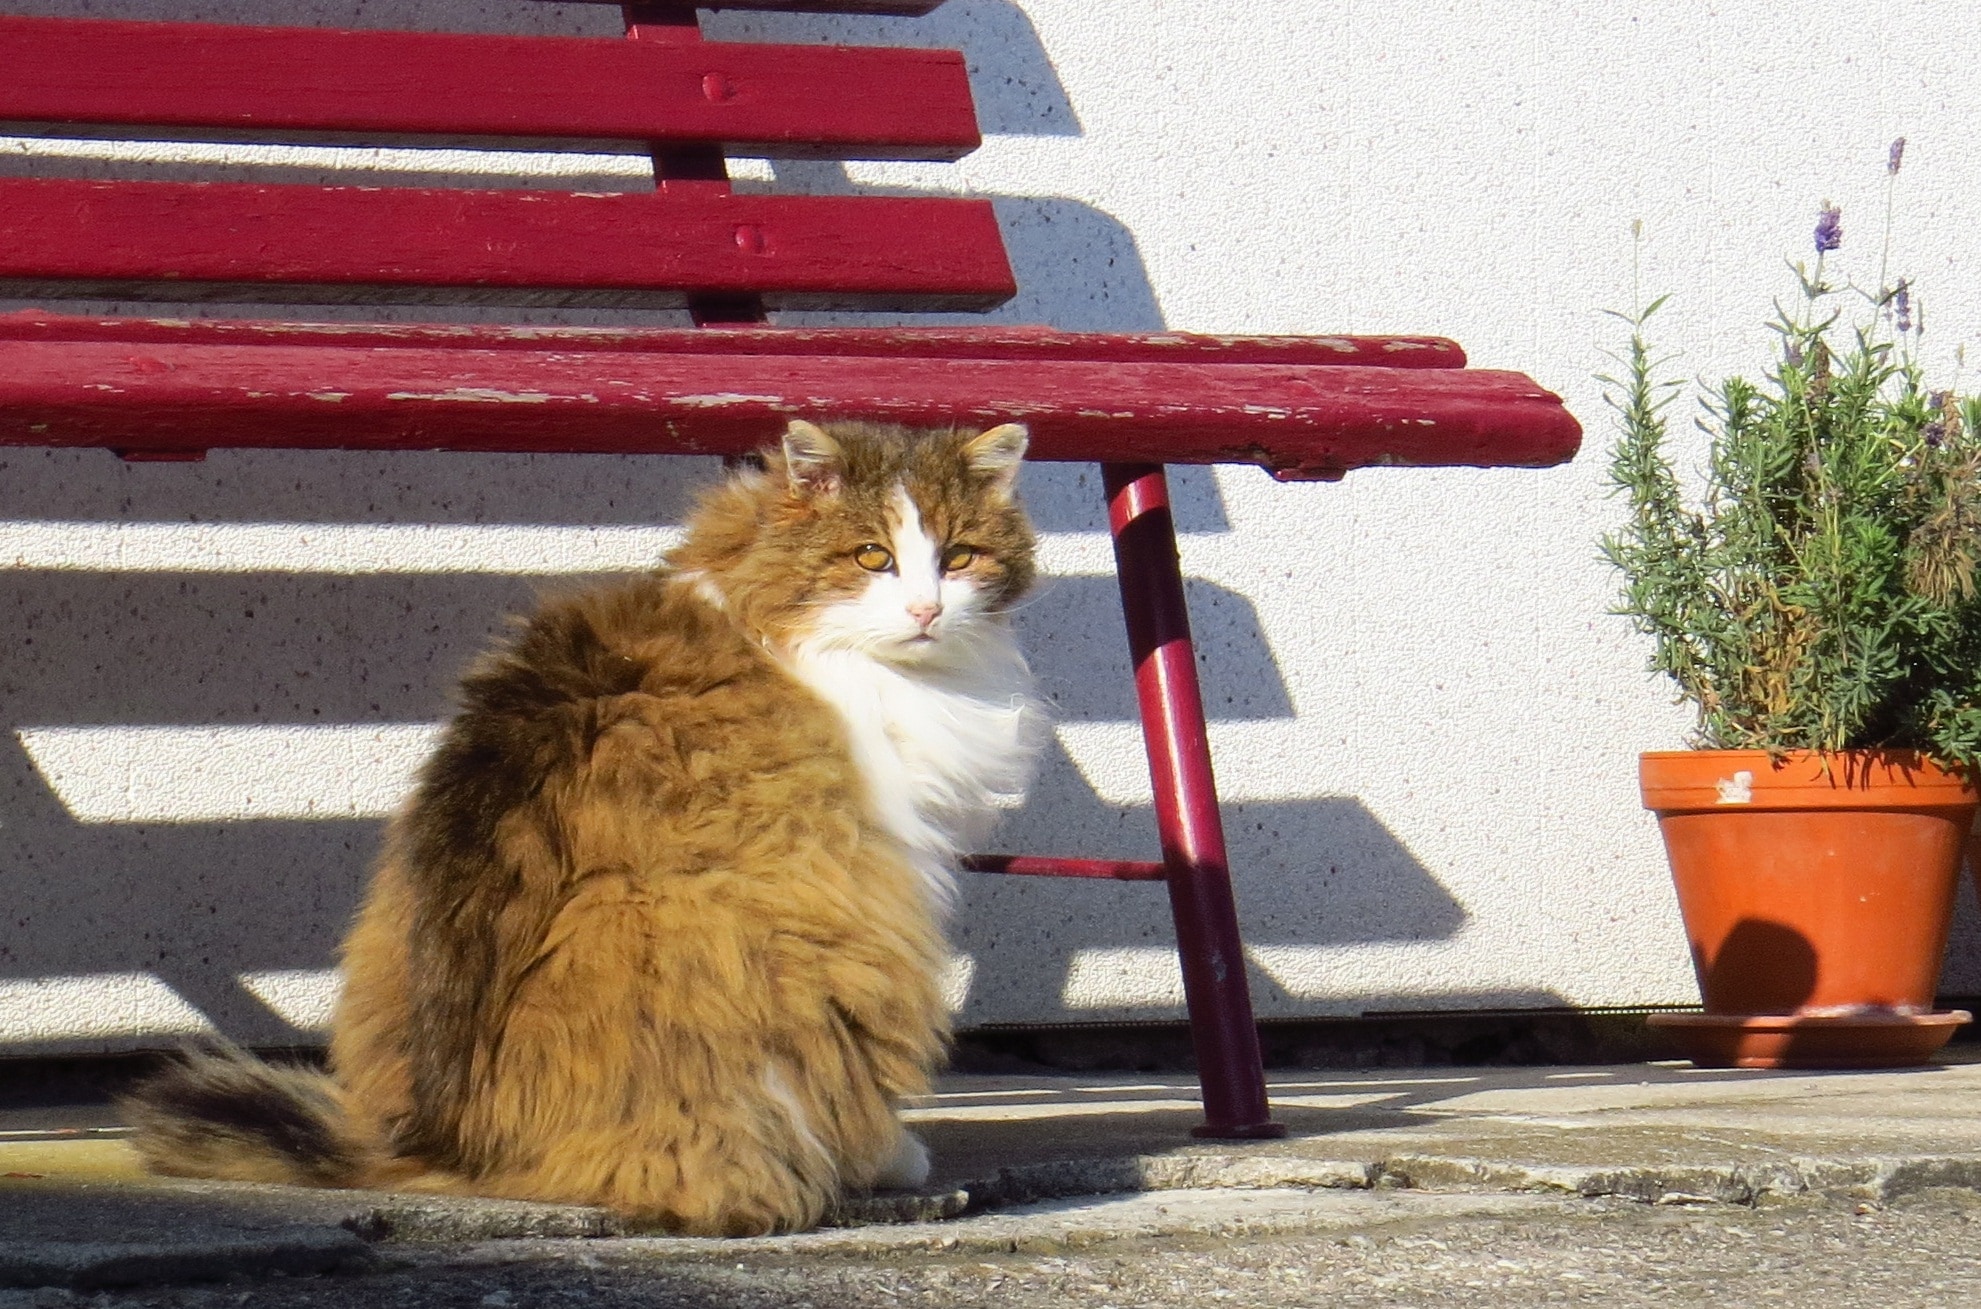 brown and white long fur cat near red metal bench